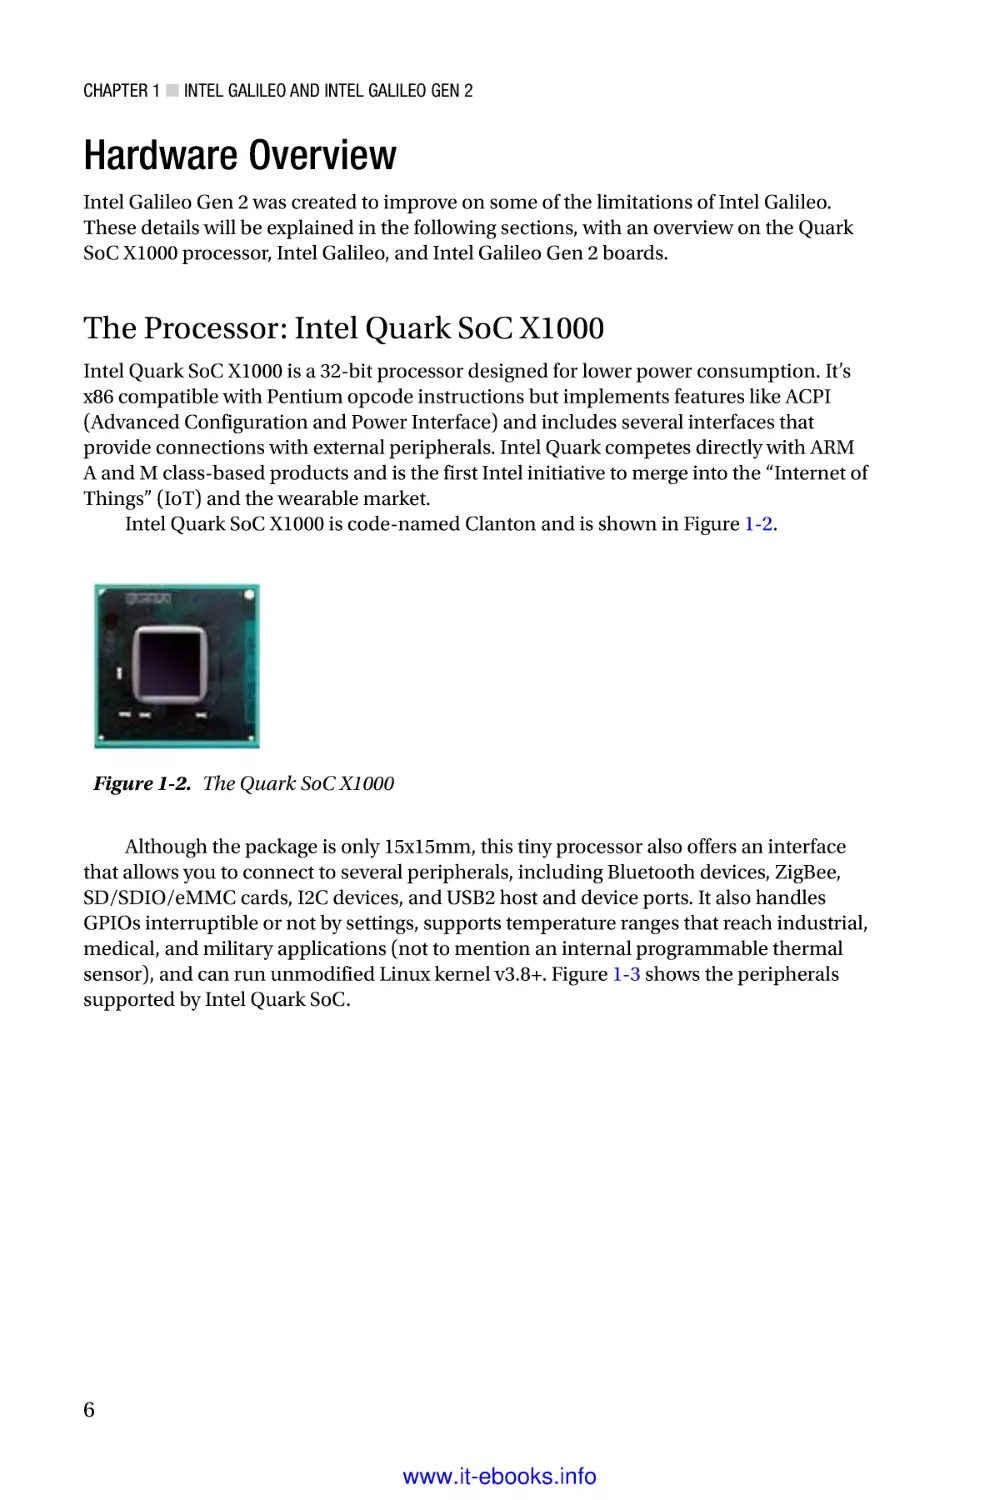 Hardware Overview
The Processor